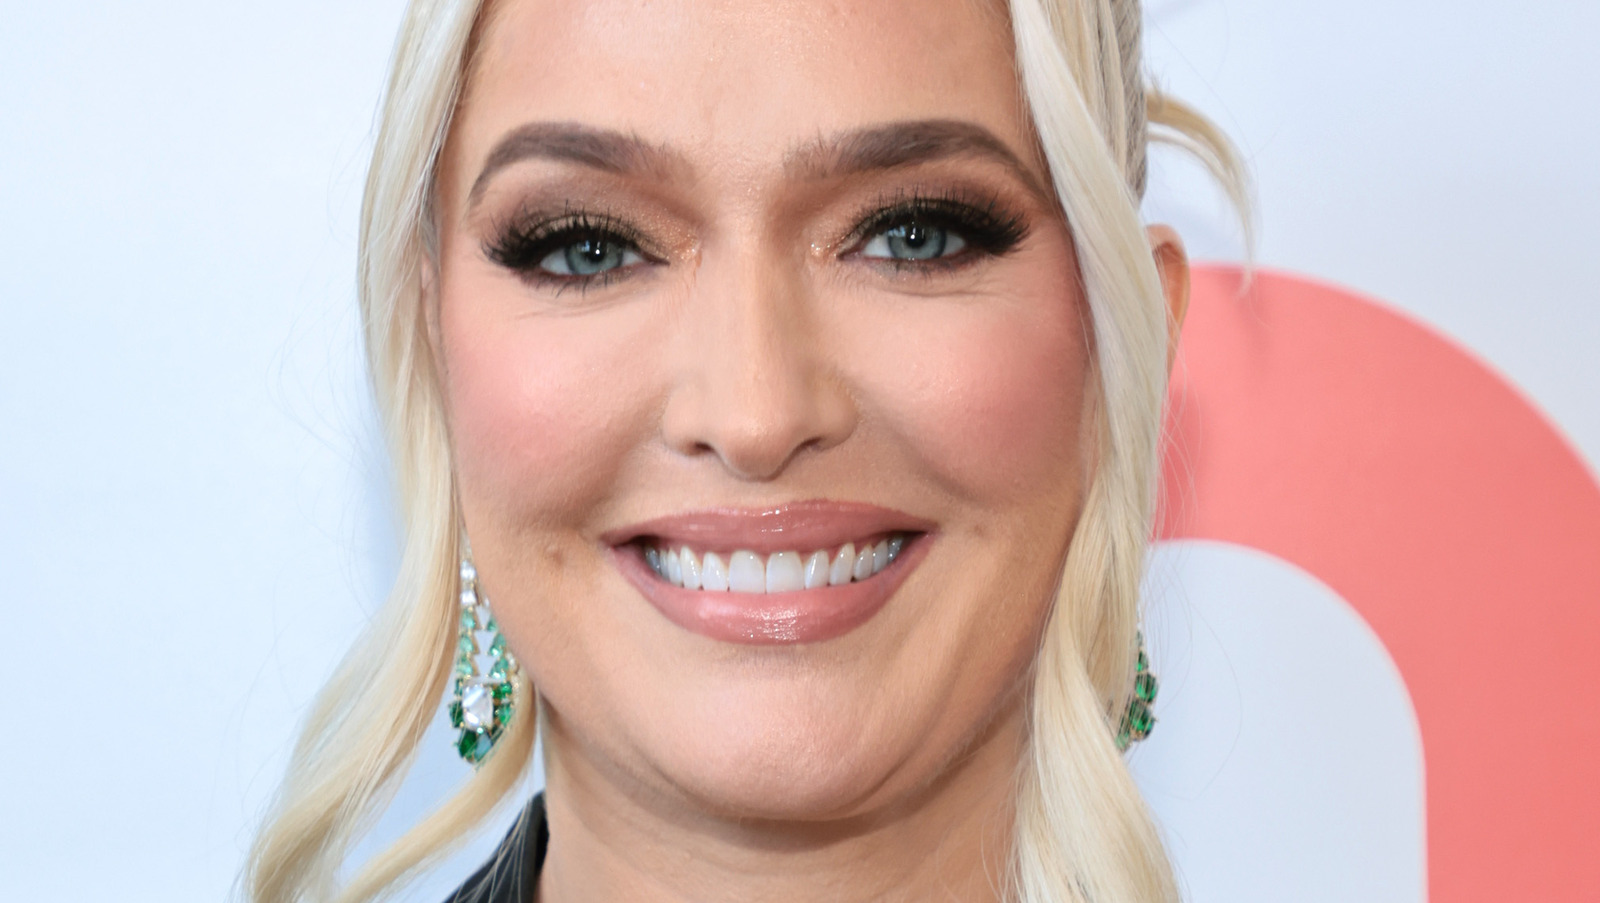 Erika Jayne Must Now Give Up A Cherished Possession Amid Legal Woes